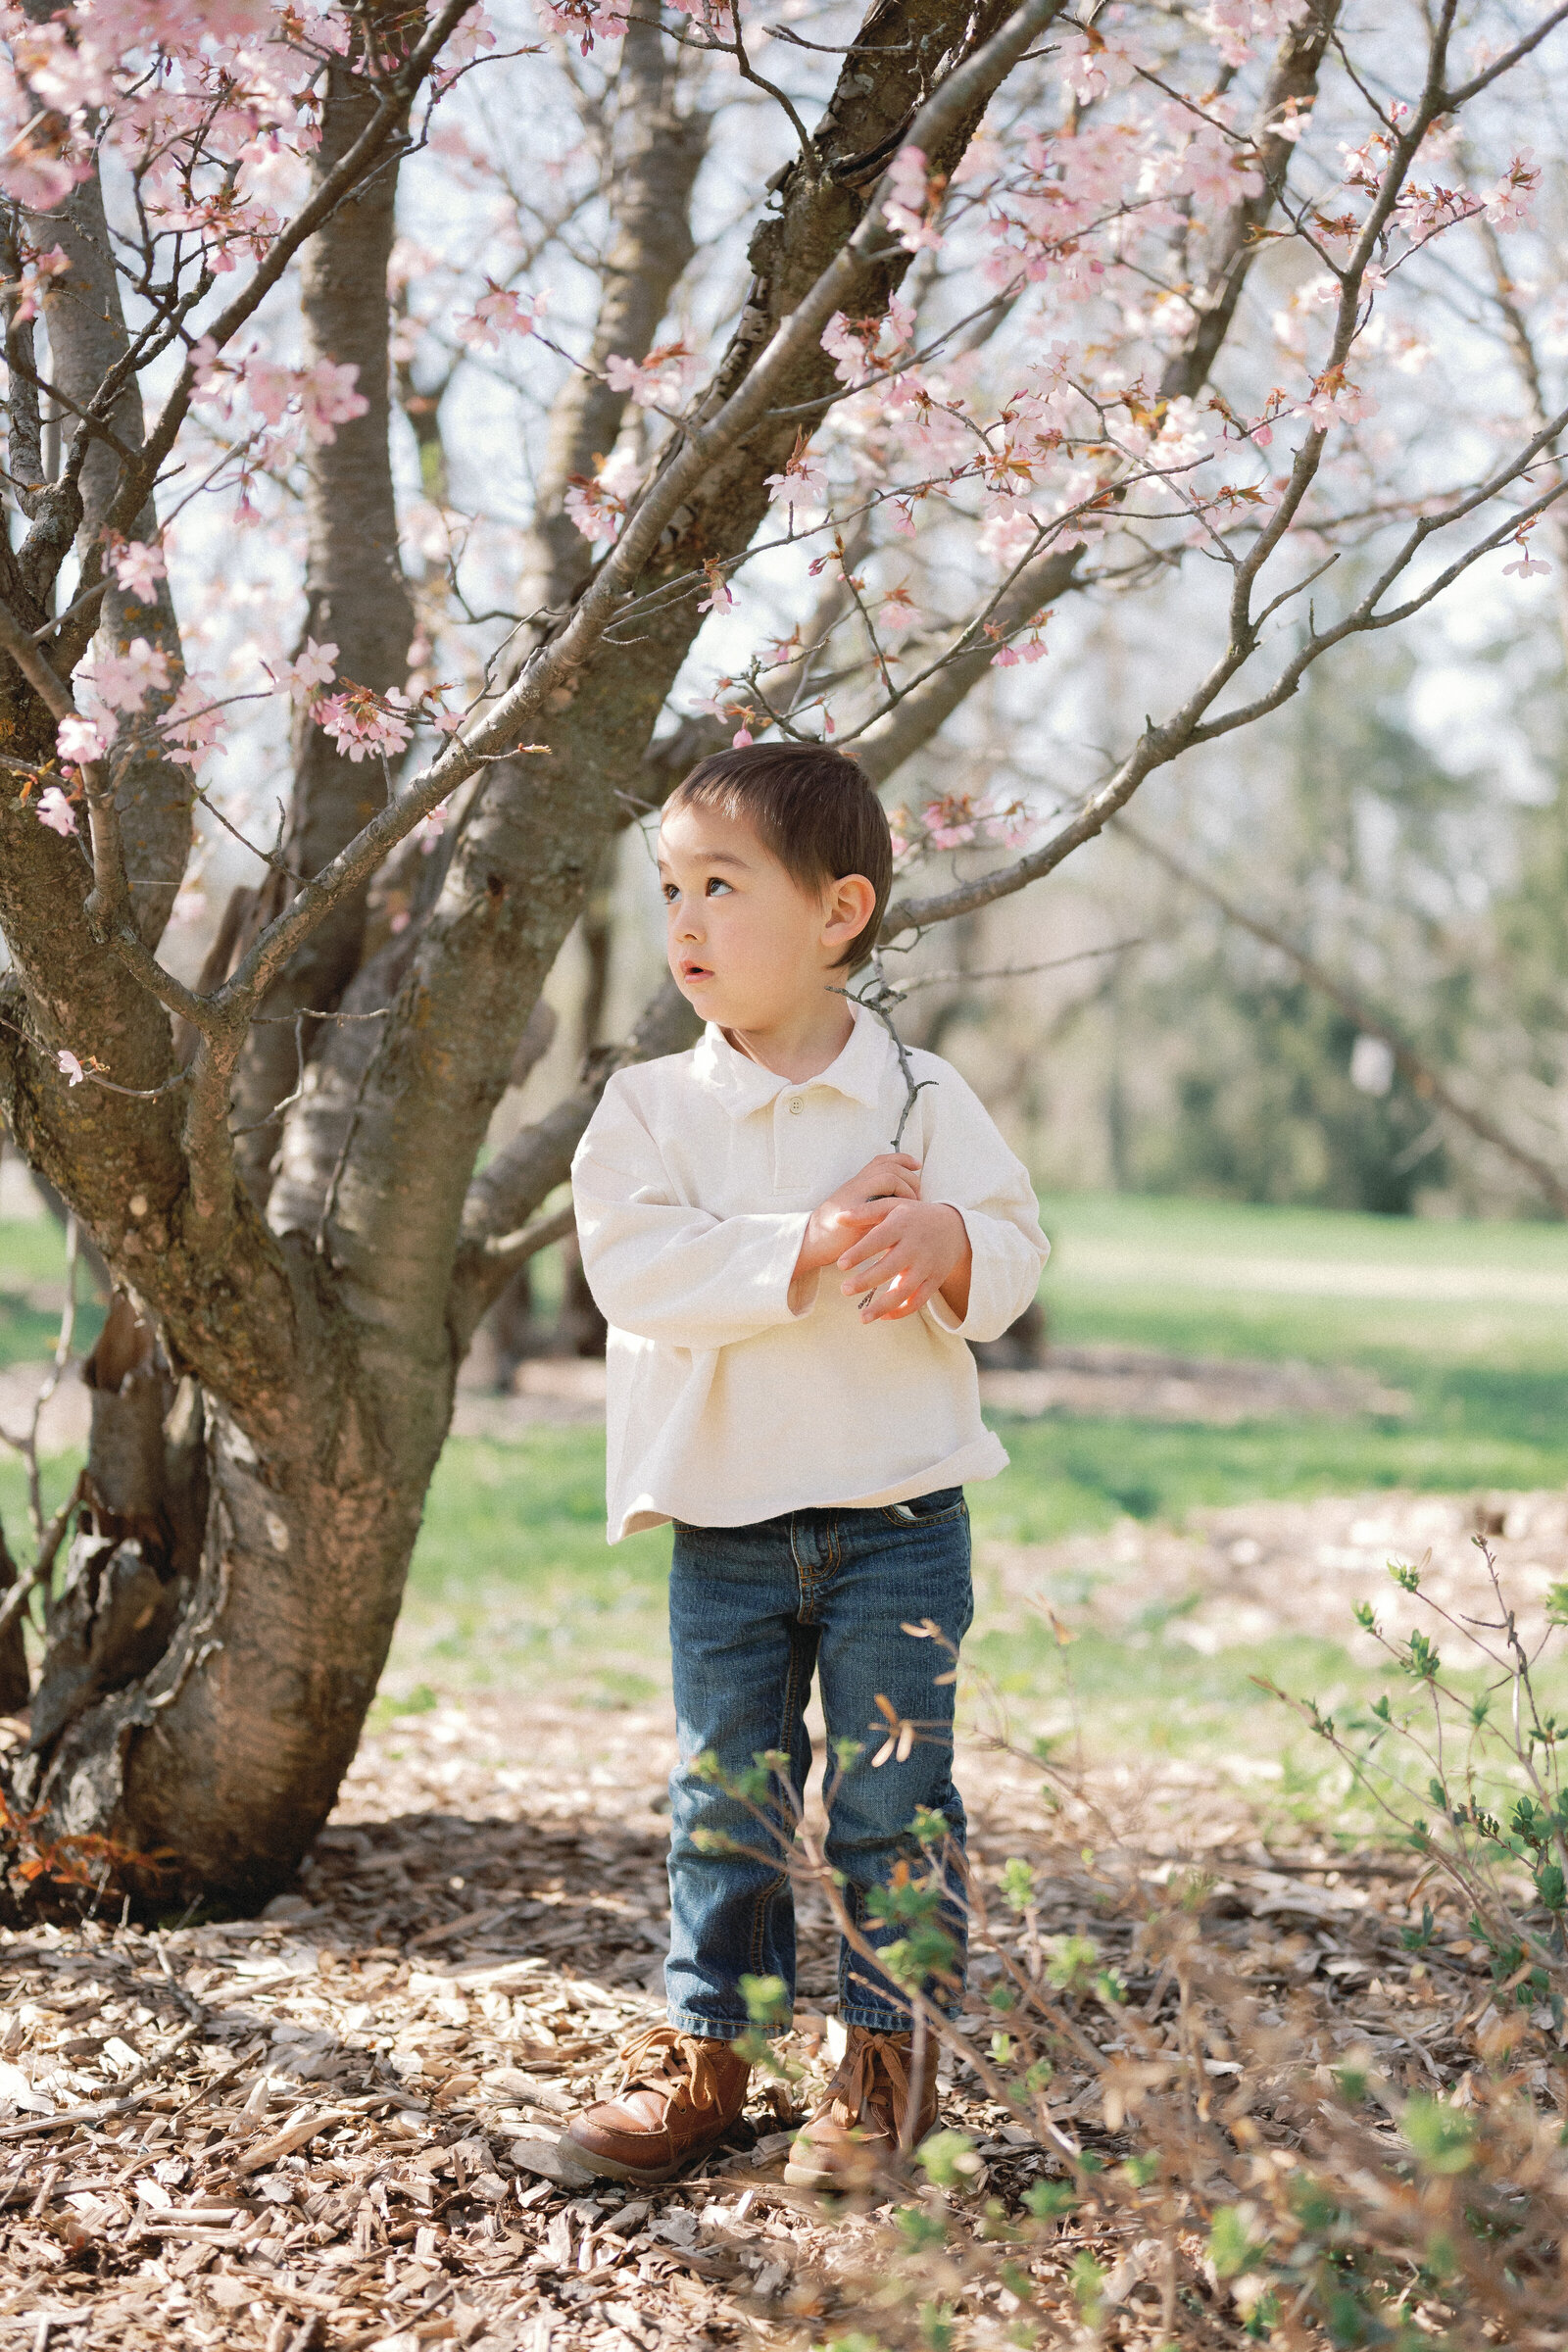 Boy in Ottawa Canada standing outside under a blossom tree